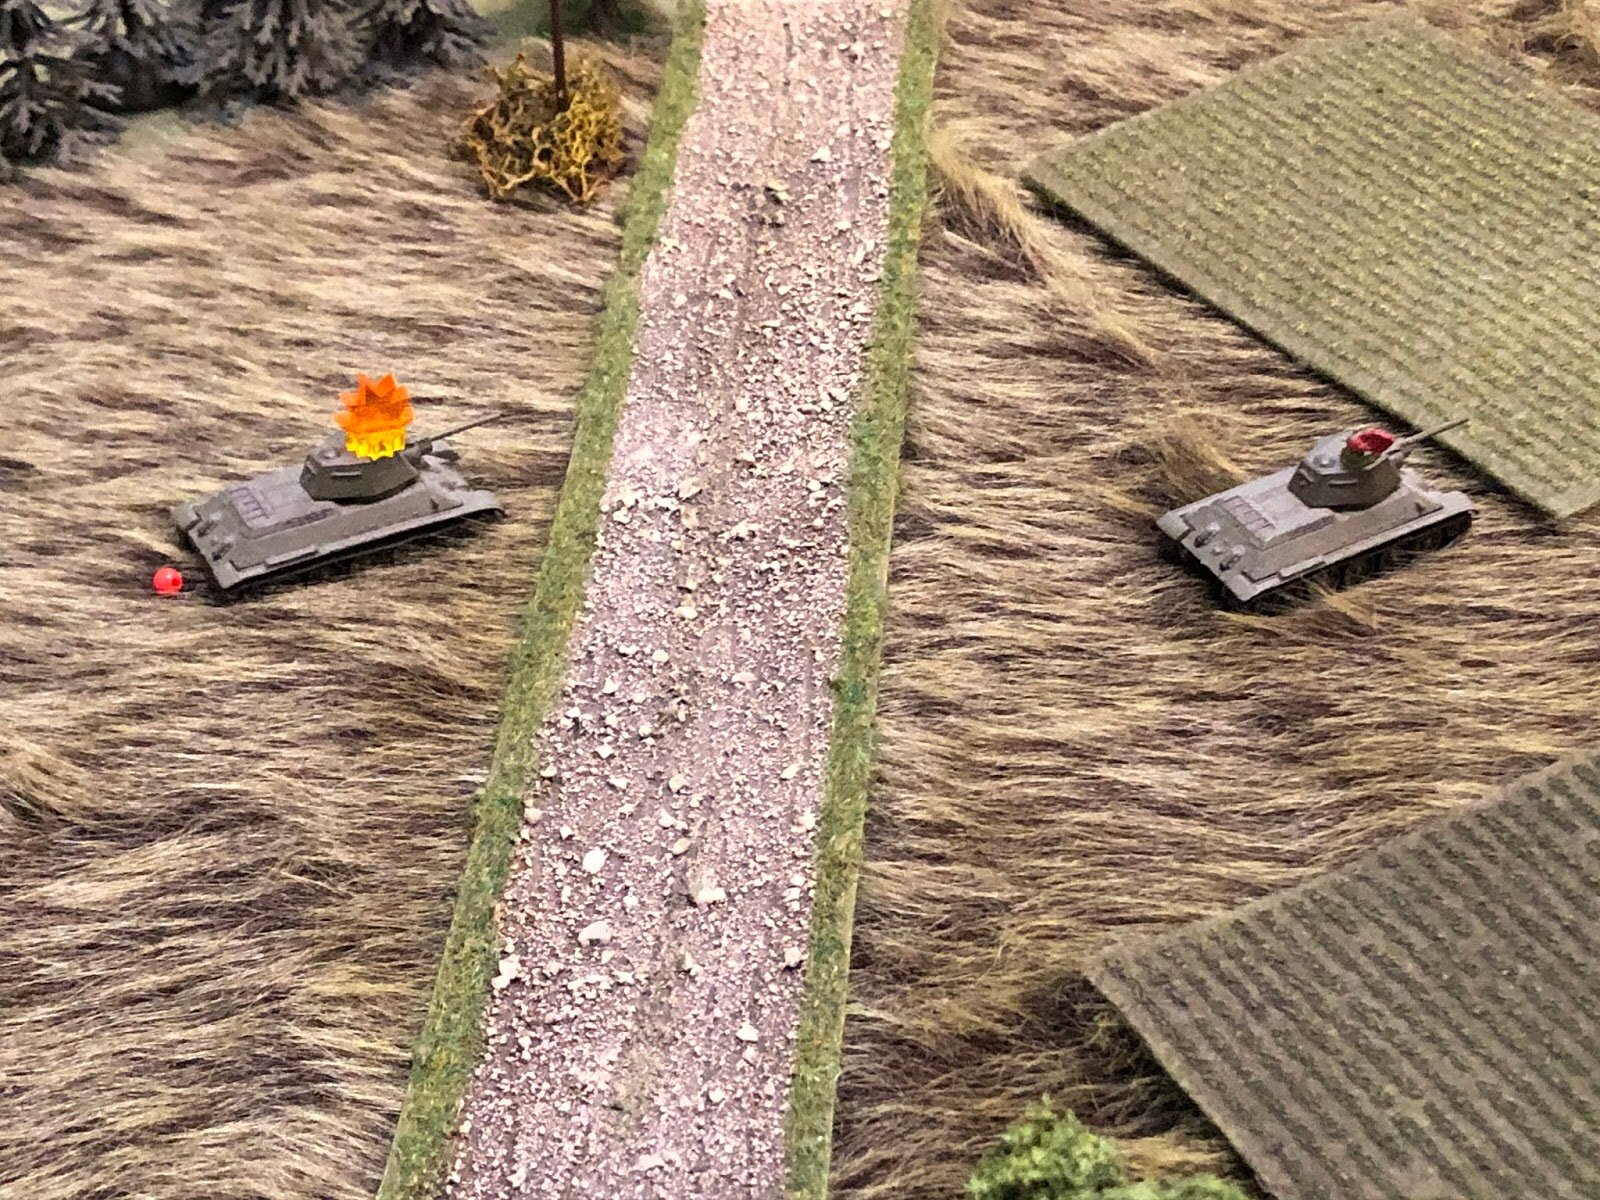  The German round slams into the T-34, then shoots straight into the sky, suppressing the enemy crew. 